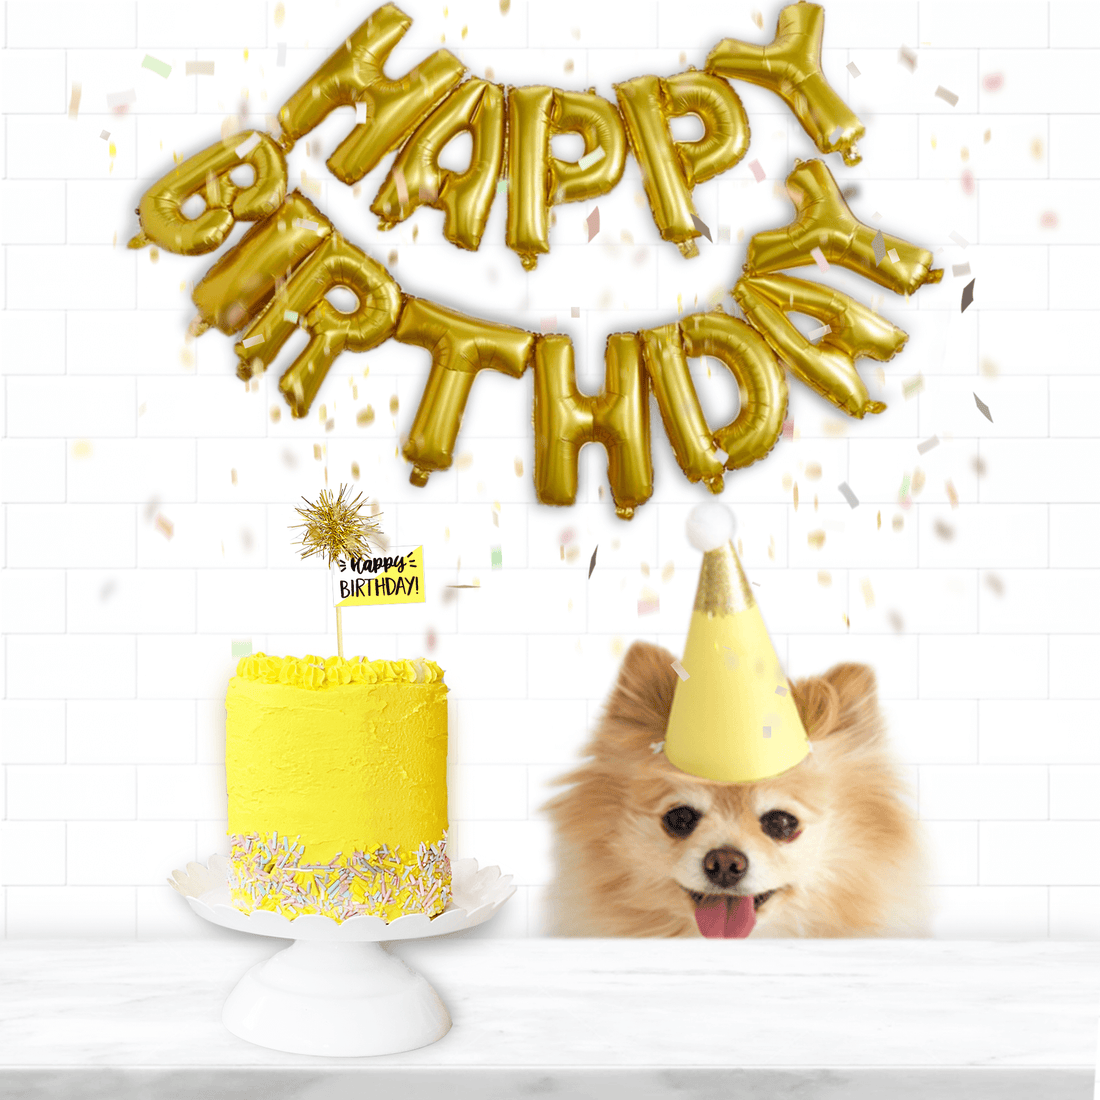 Celebrate your Dog's Birthday Party with a Dog Birthday Cake from our dog bakery